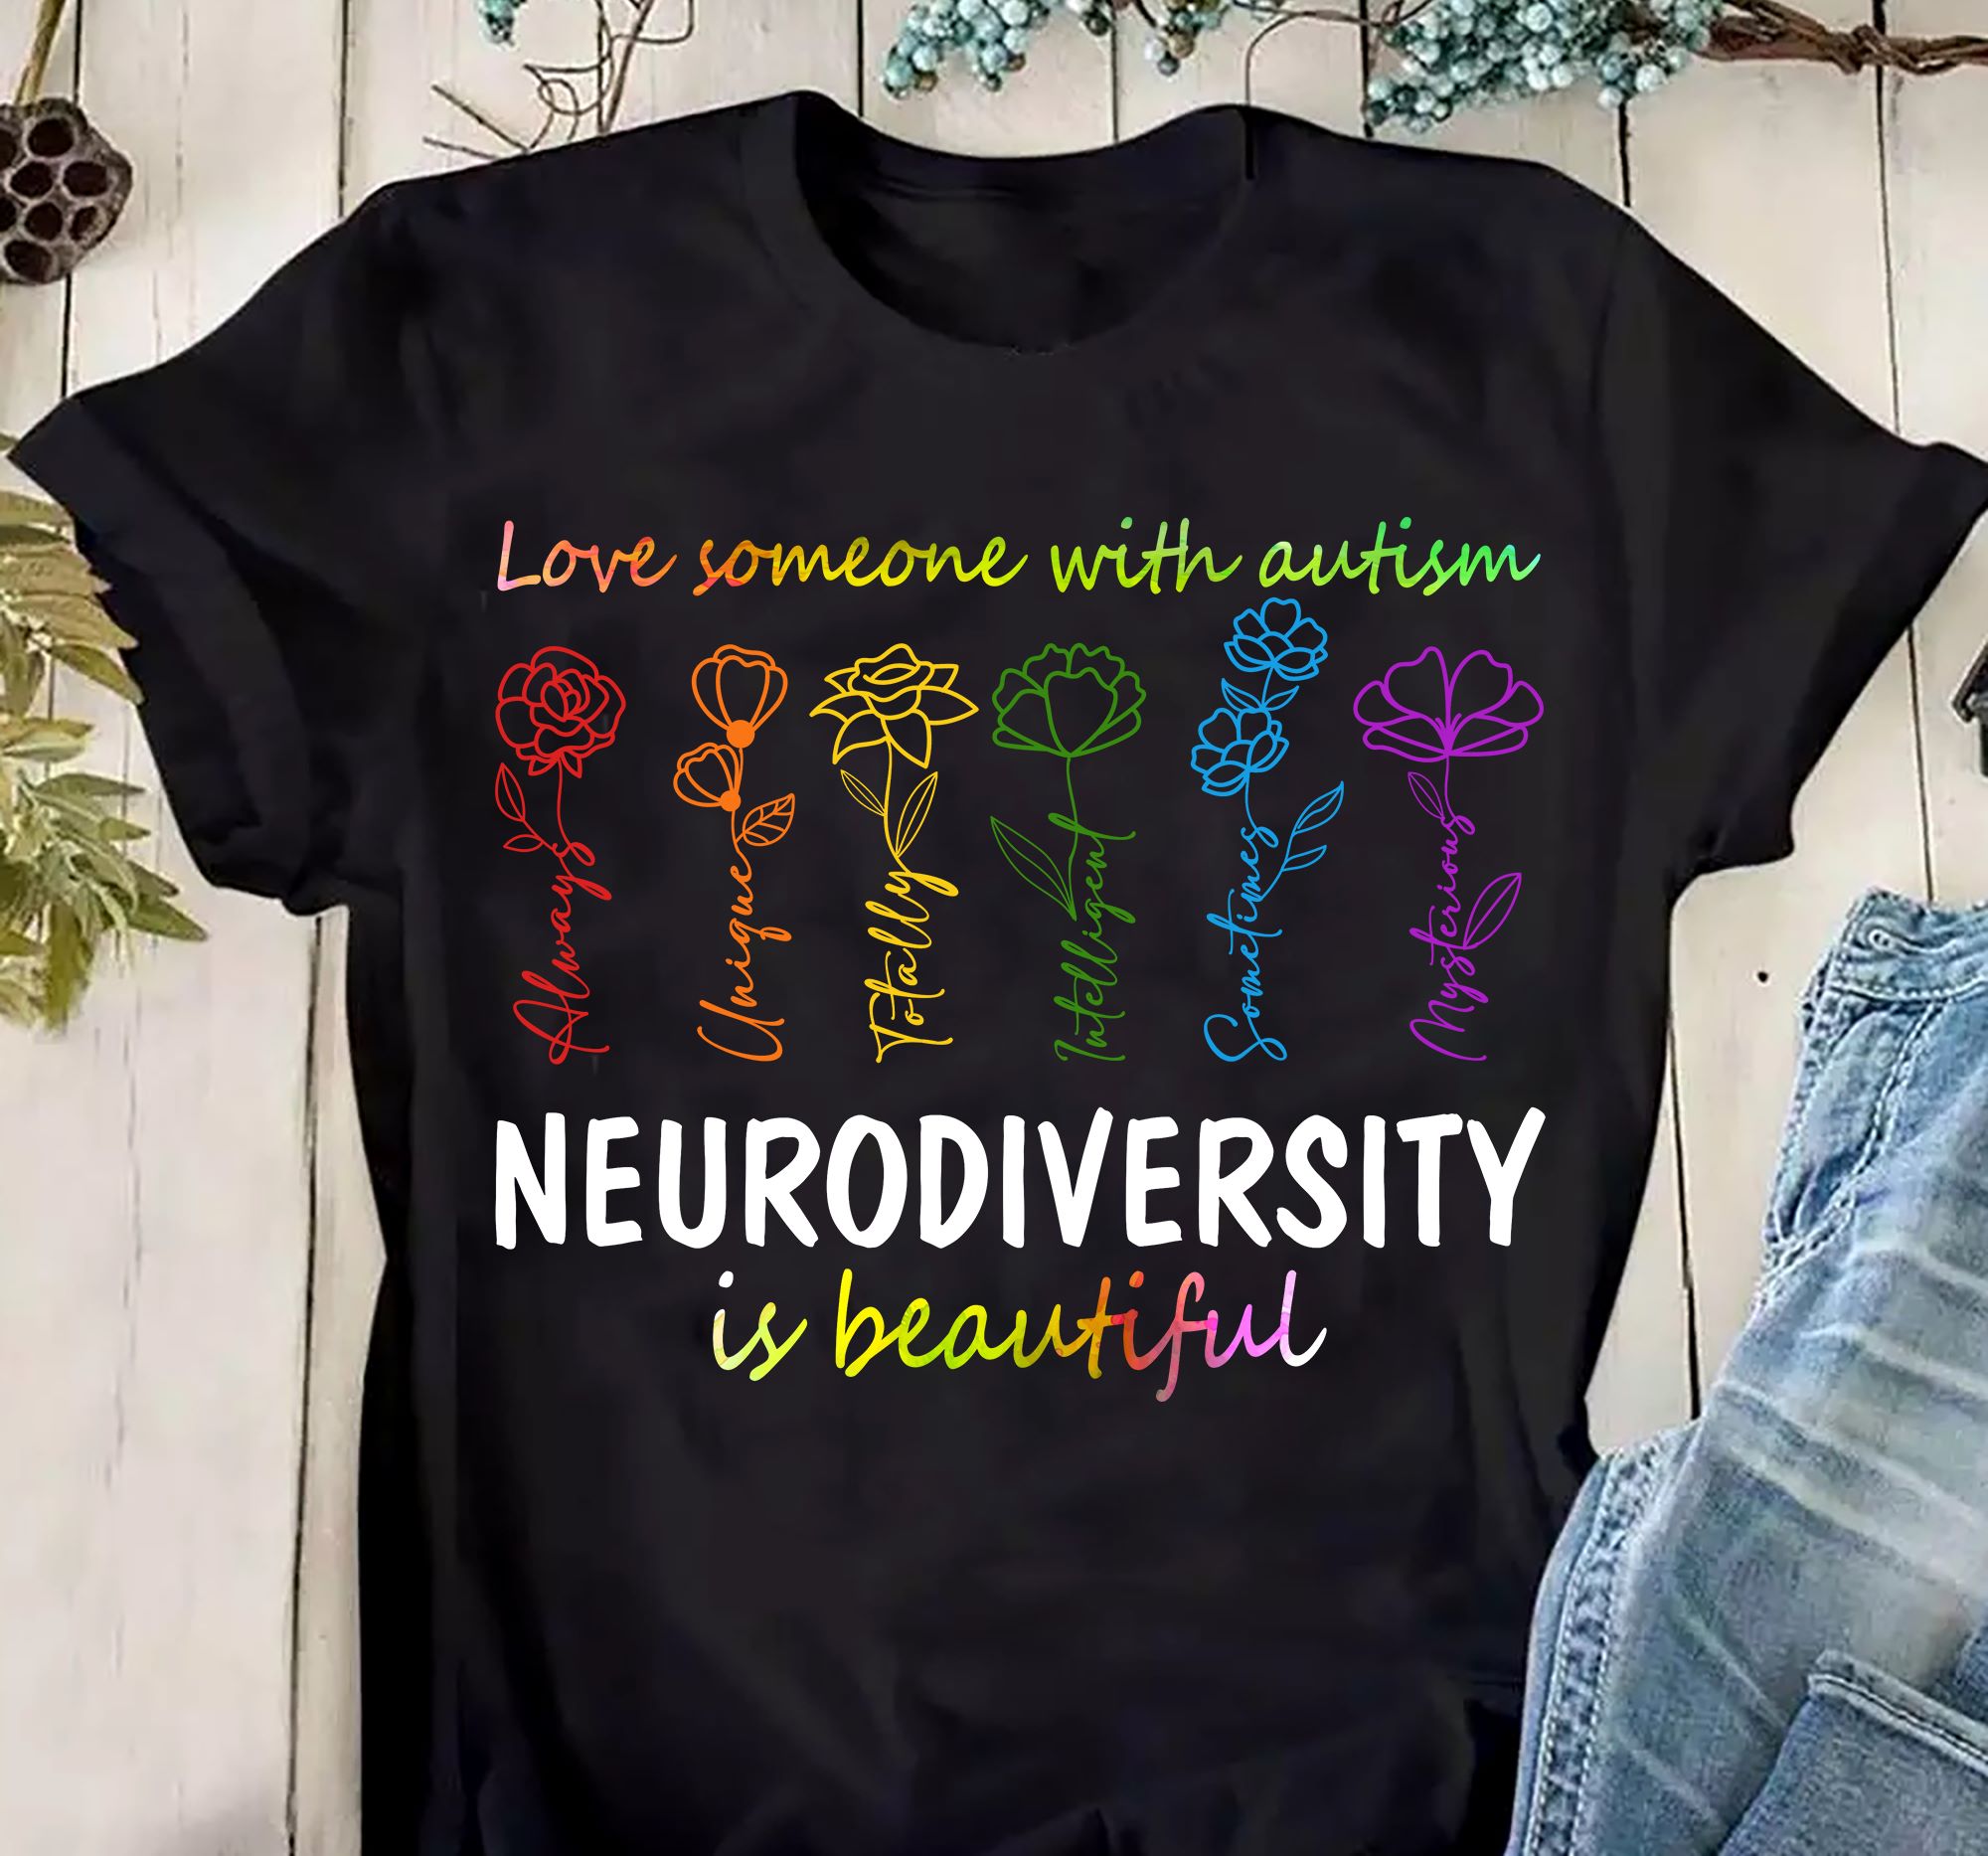 Love someone with autism - Neurodiversity is beautiful - Always uniqe totally intelligent sometimes mysterious